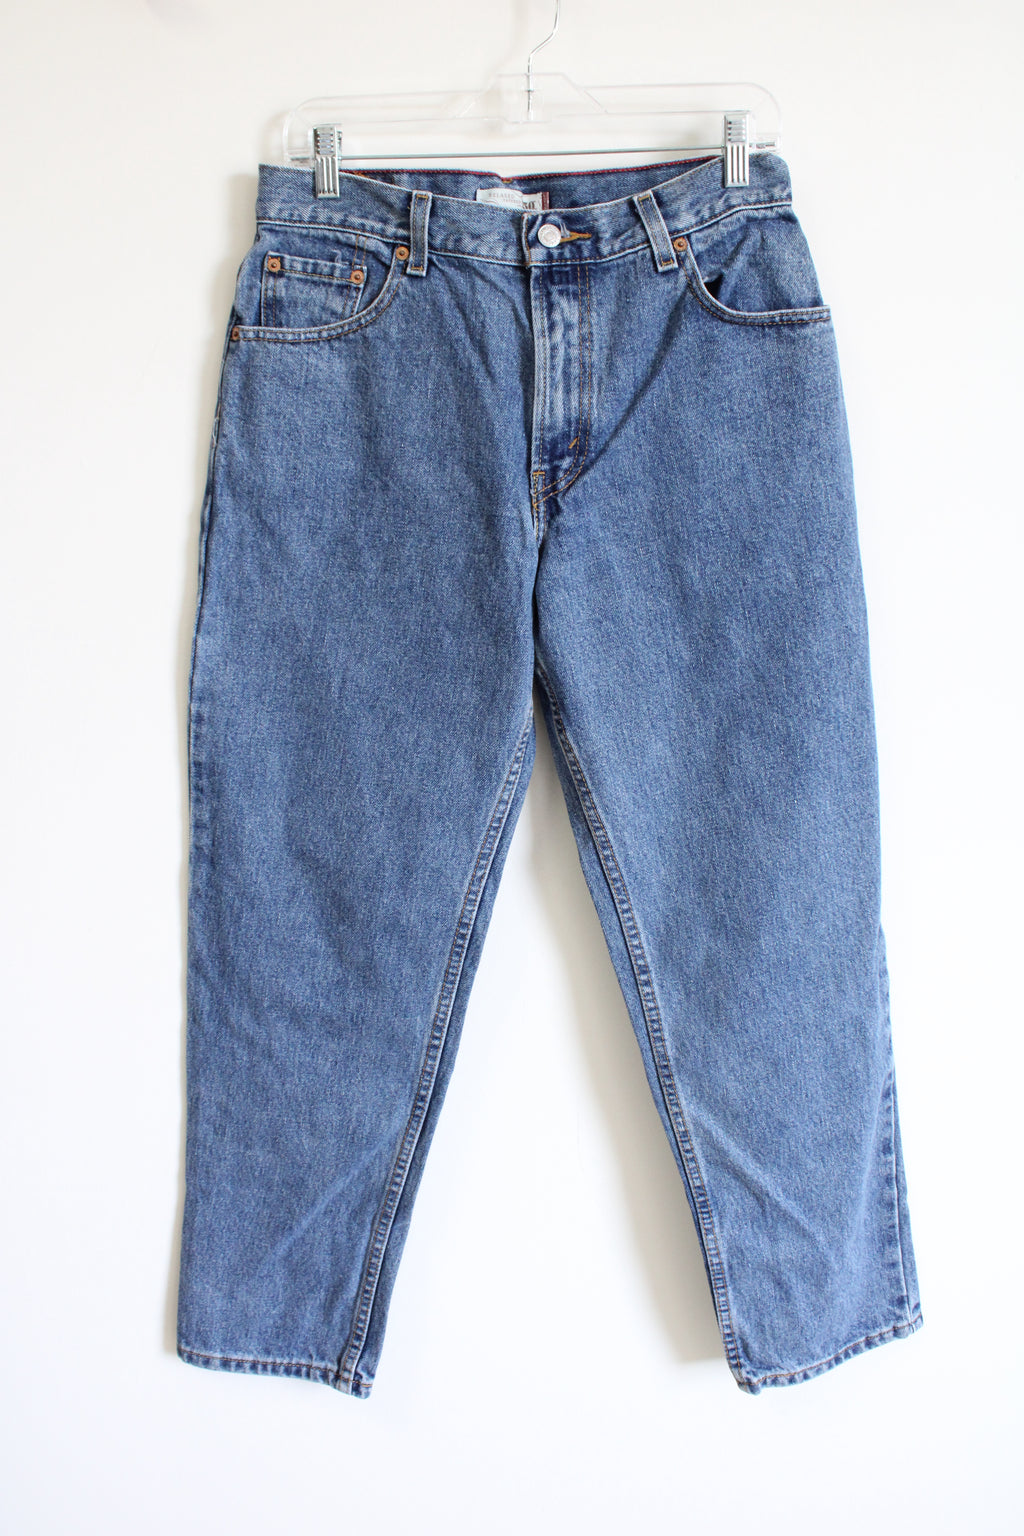 Levi's Relaxed Tapered 550 Jeans | 10 Short